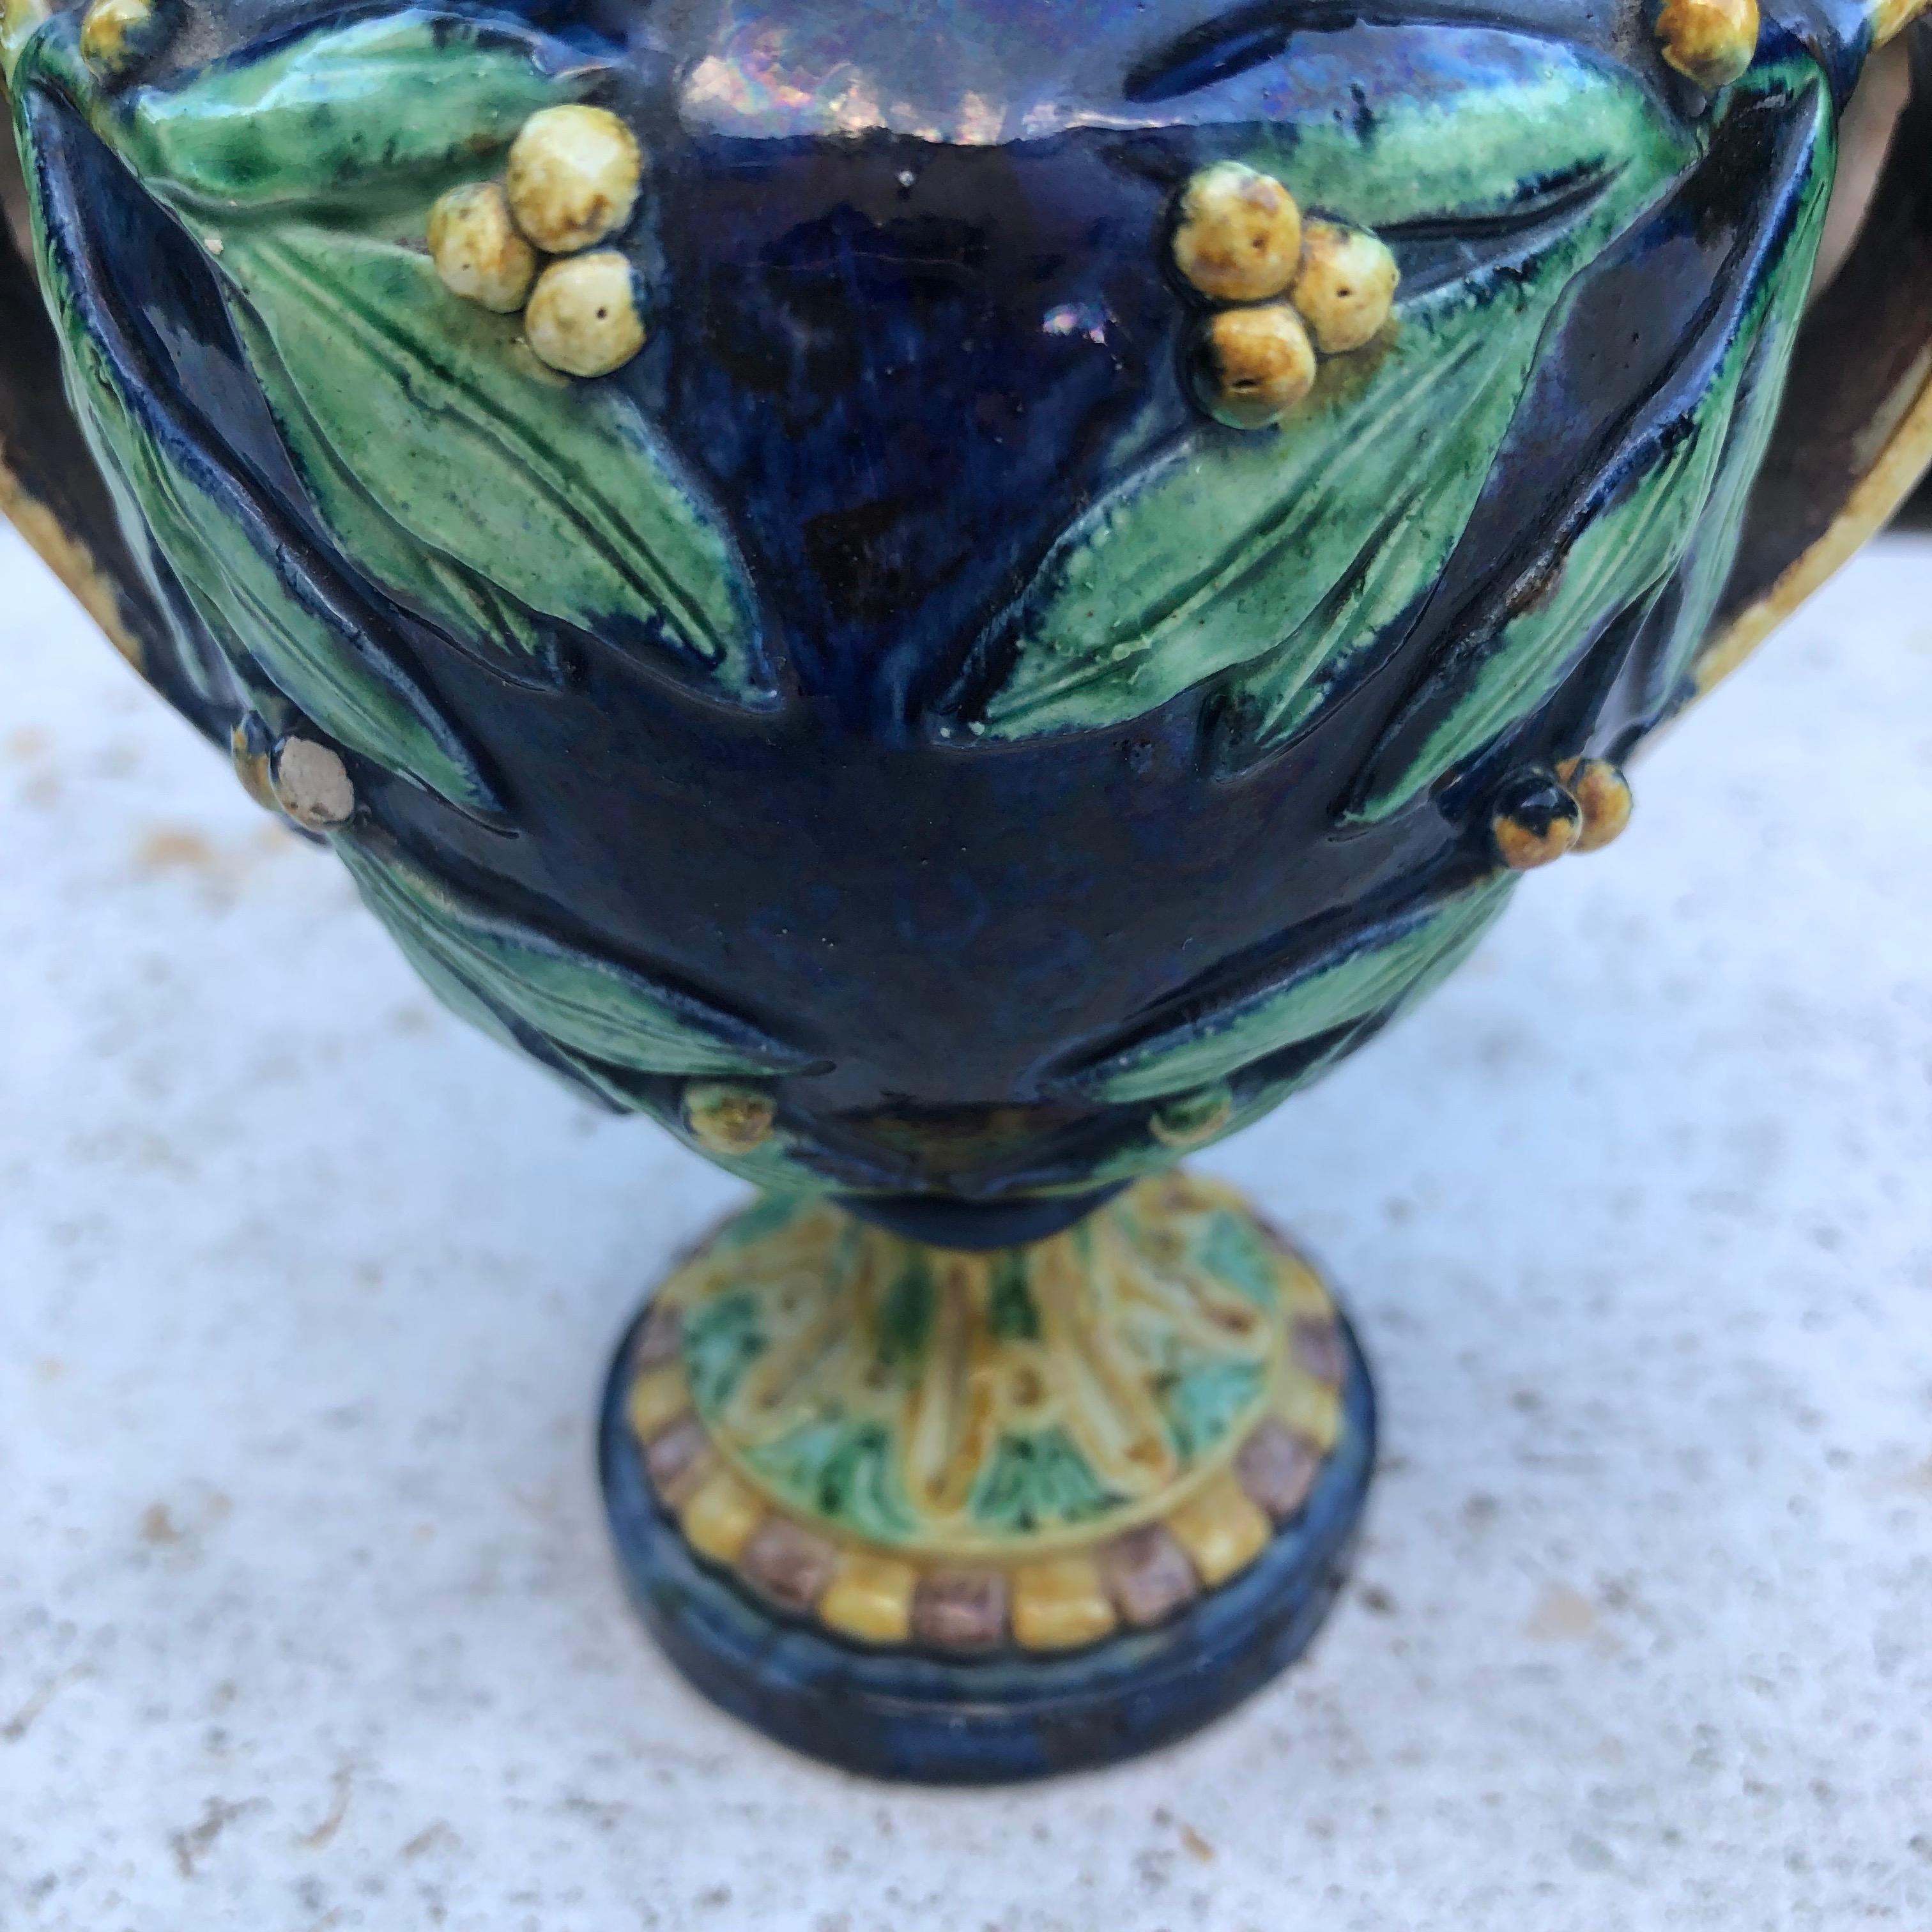 Small Palissy handled vase decorated with mistletoe, circa 1880.
The School of Paris was composed by makers as Victor Barbizet, Francois Maurice, Thomas Sergent, Georges pull, it's a group of ceramists who produced Palissy pieces at the end of 19th